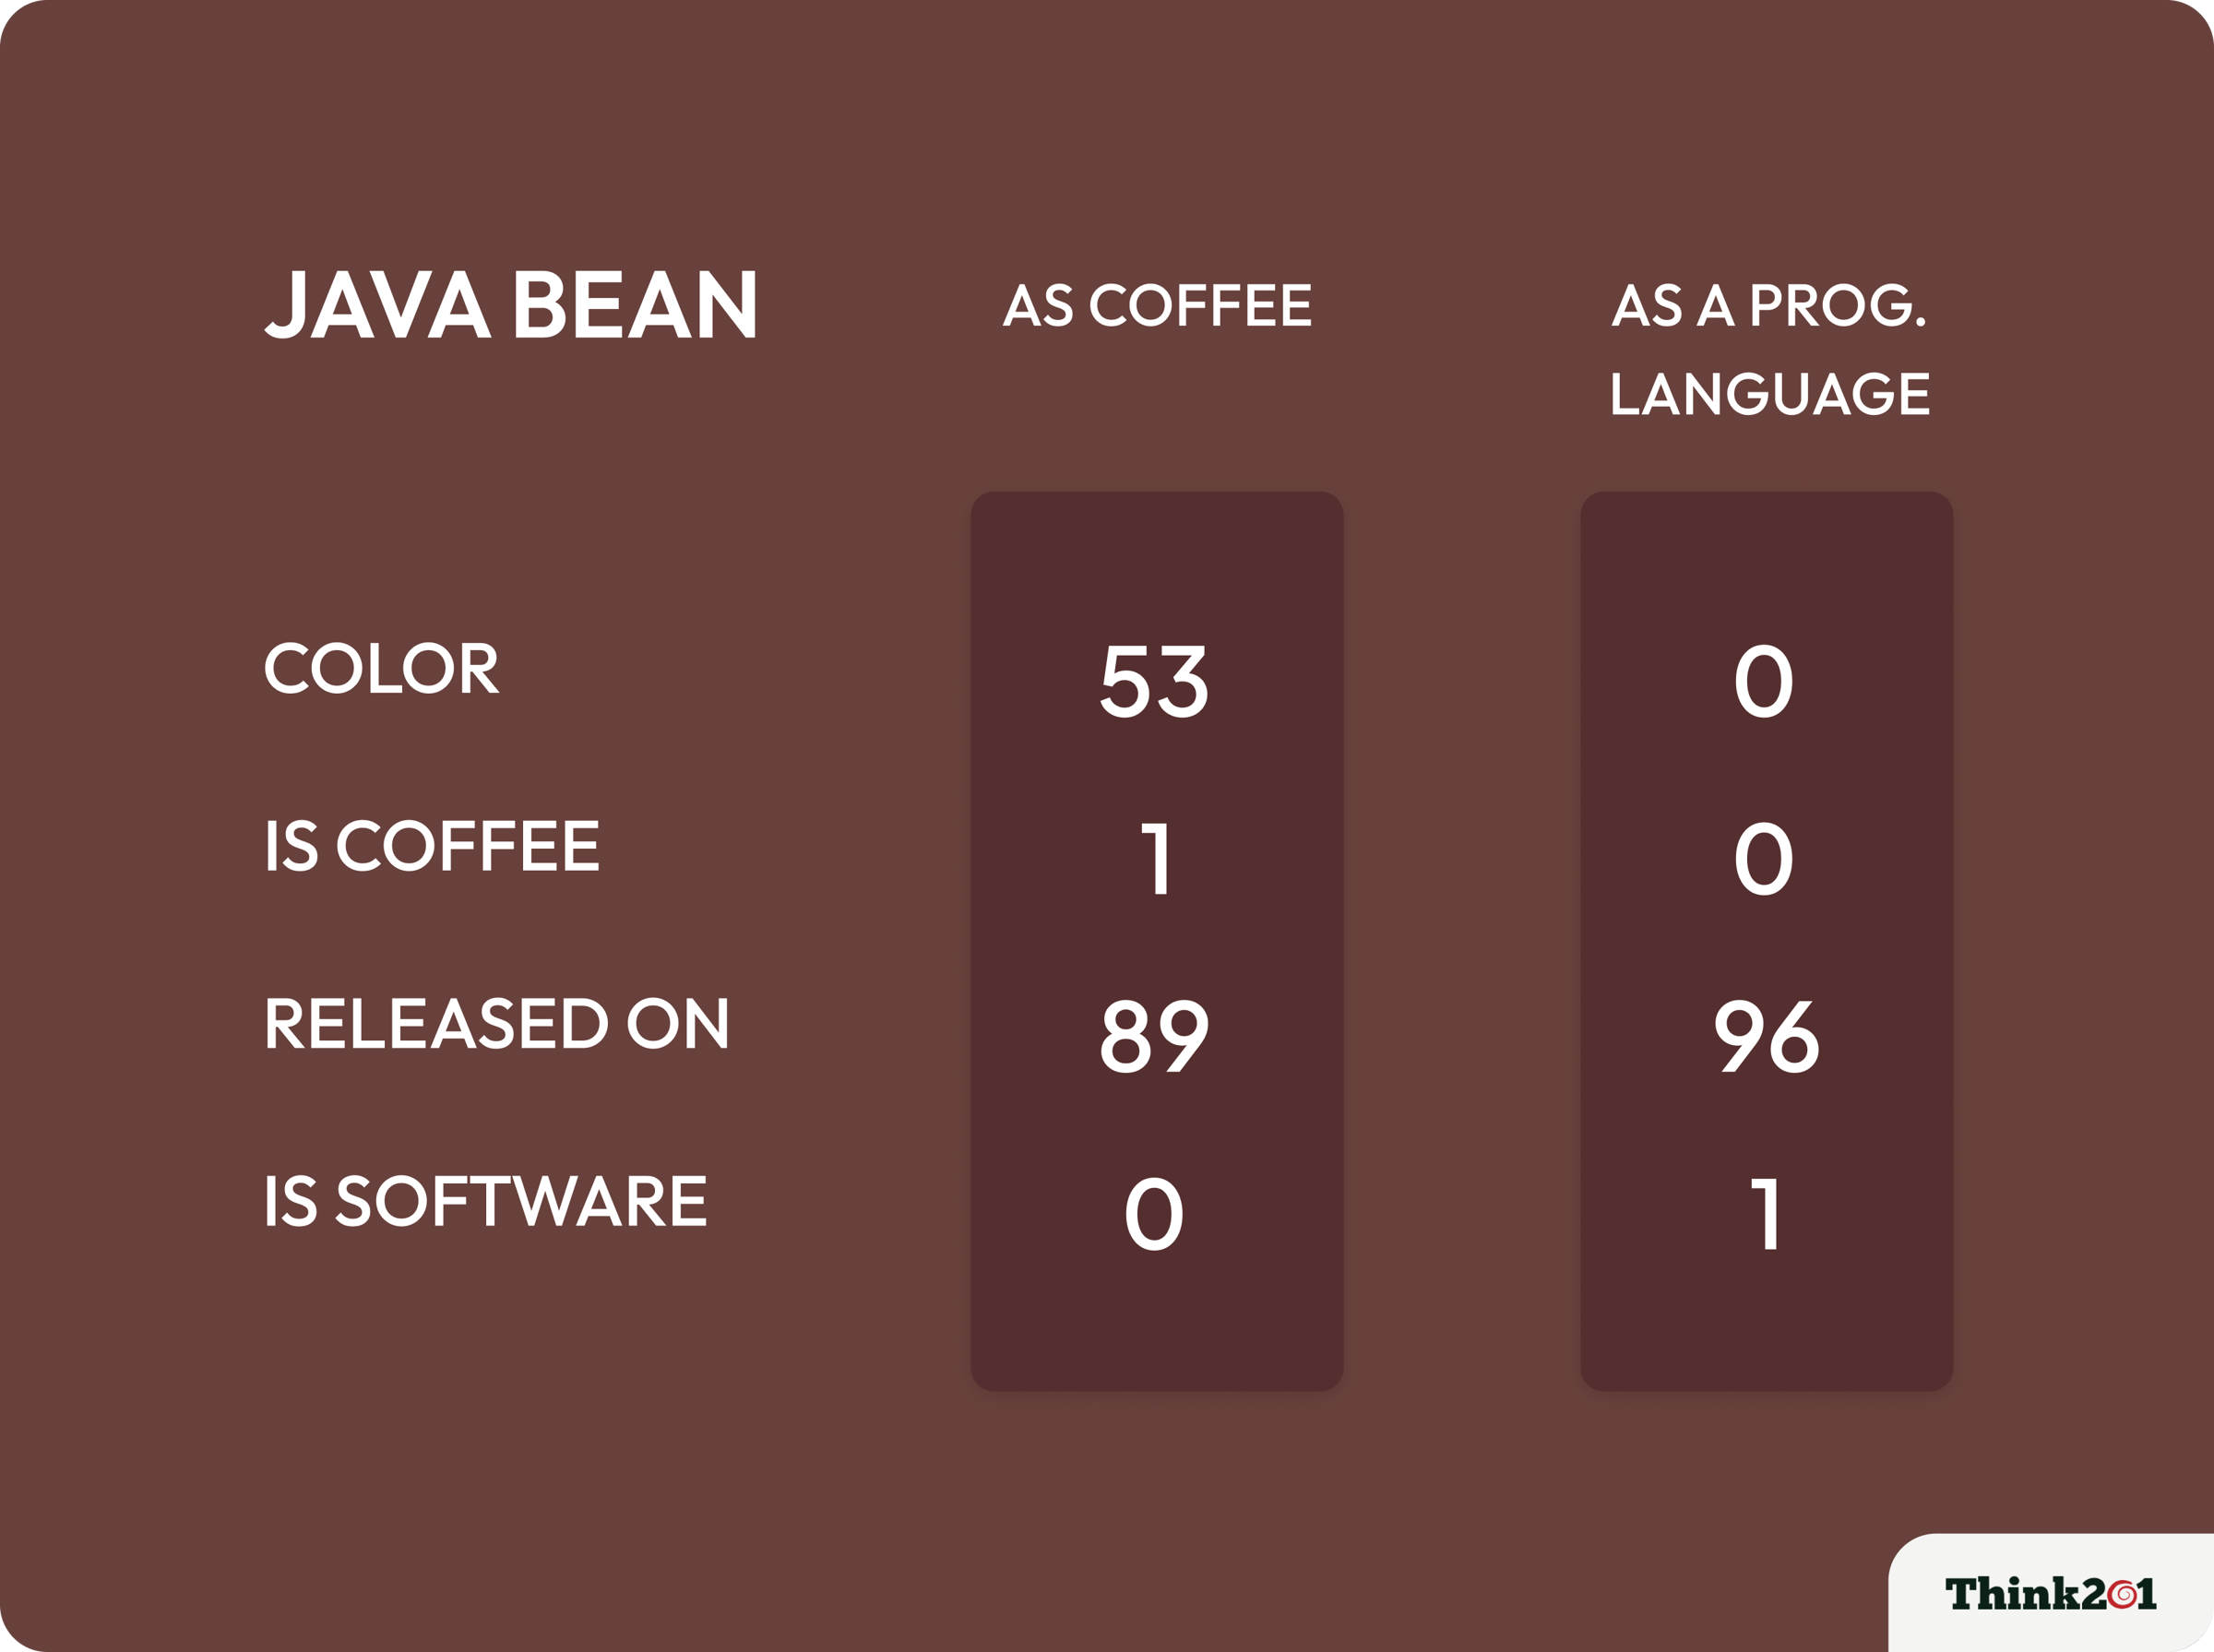 Representation of java bean as coffee bean and software